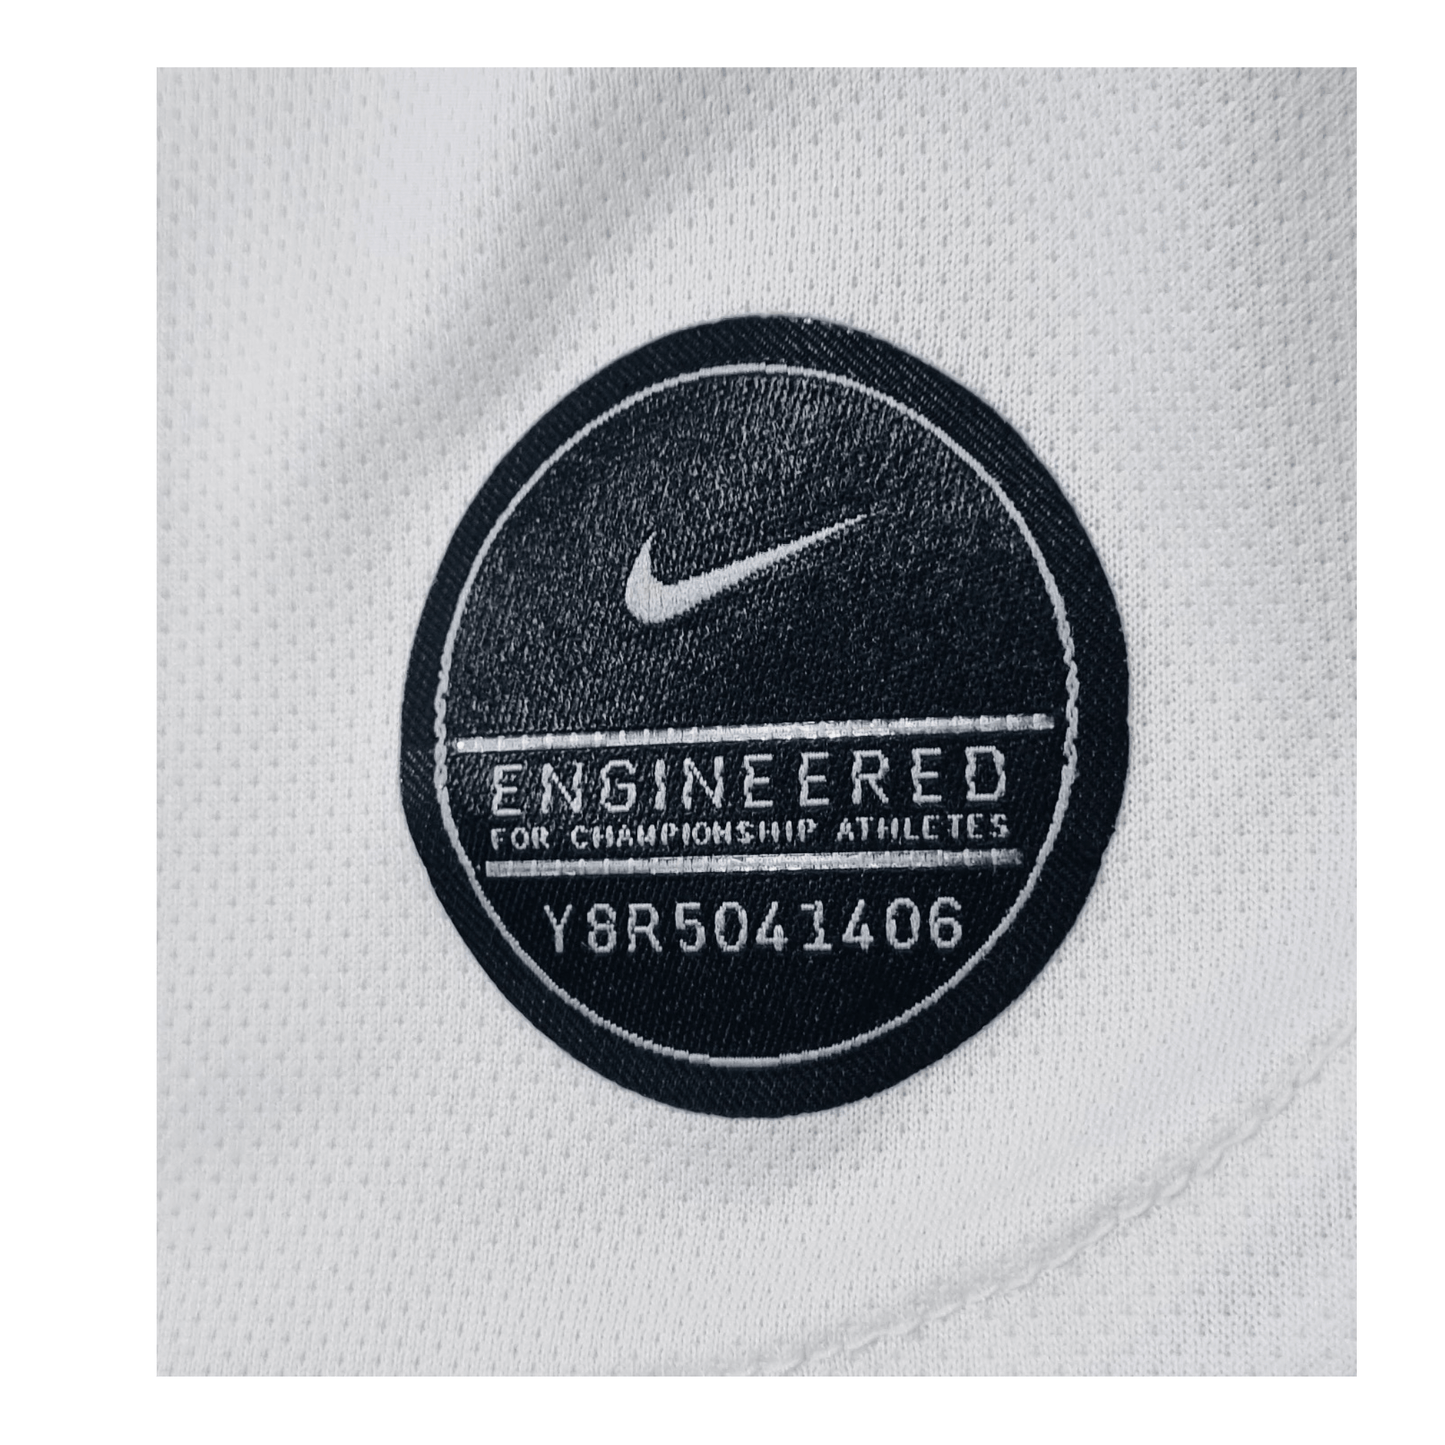 USA 2019/20 Home Jersey - Tag